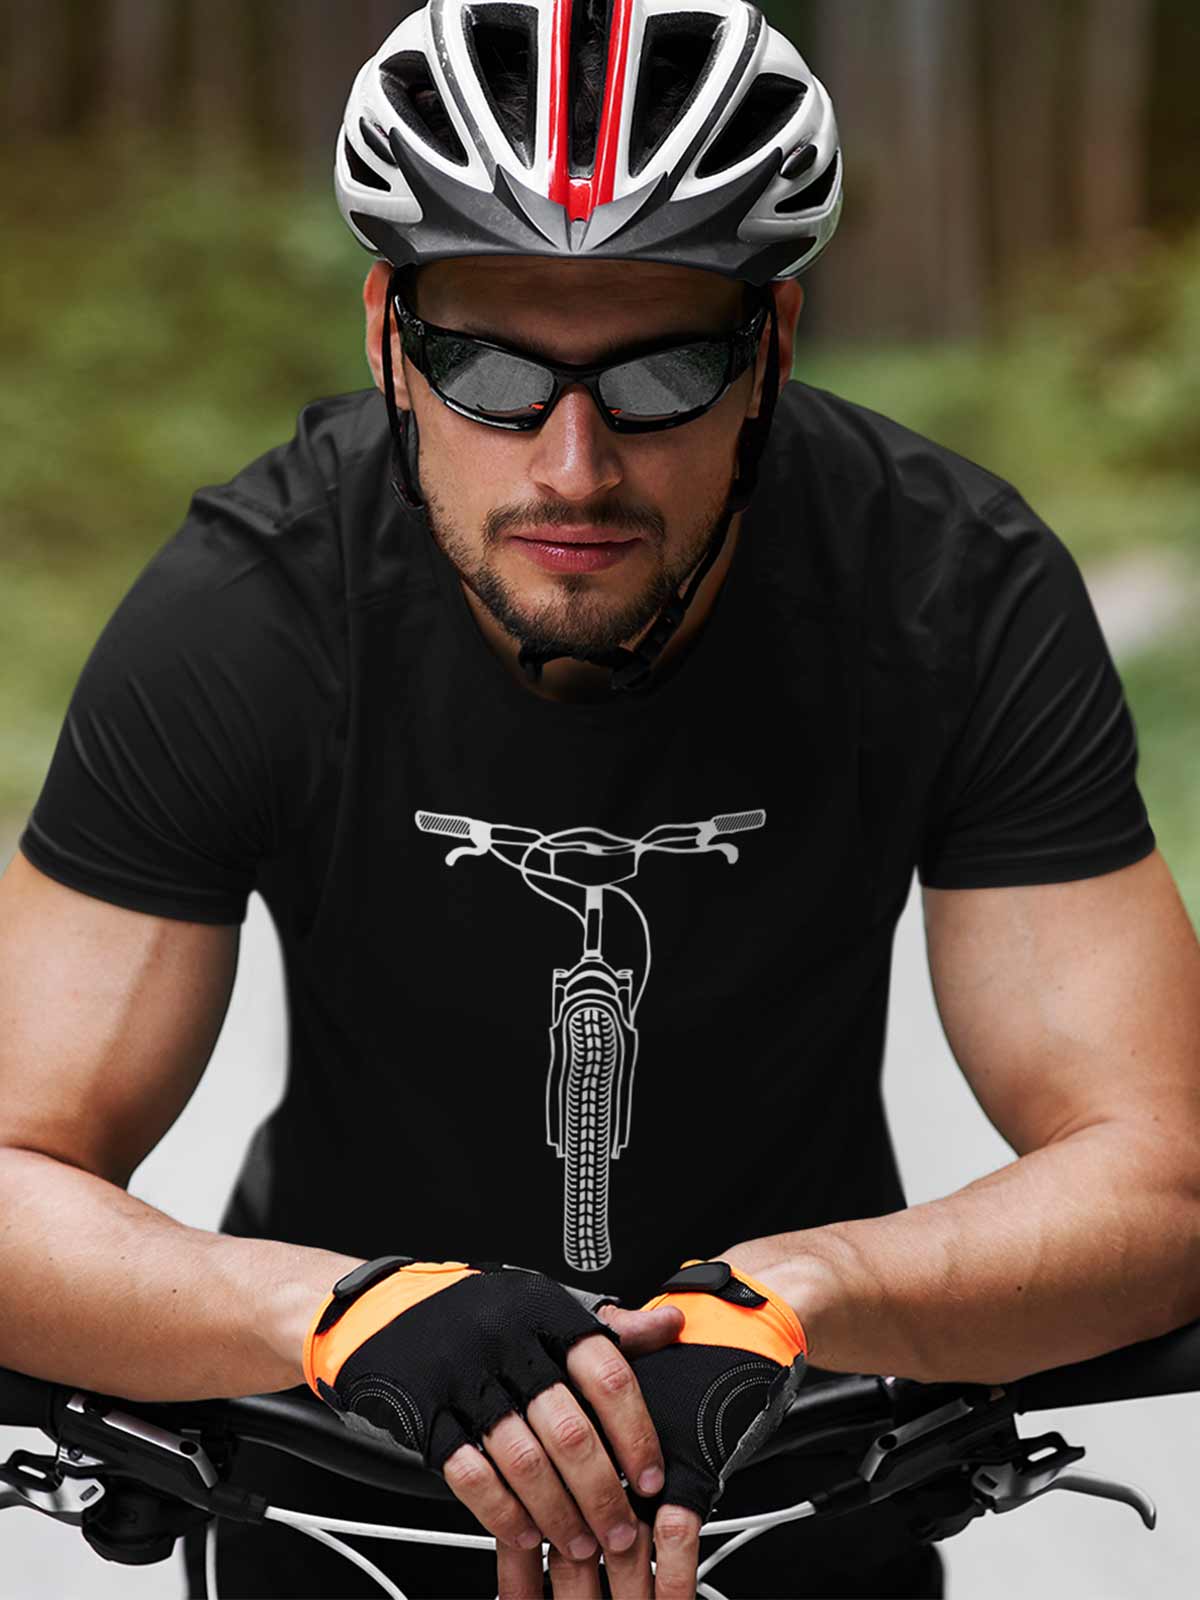 Ride-me-printed-t-shirt-for-men by Ghumakkad